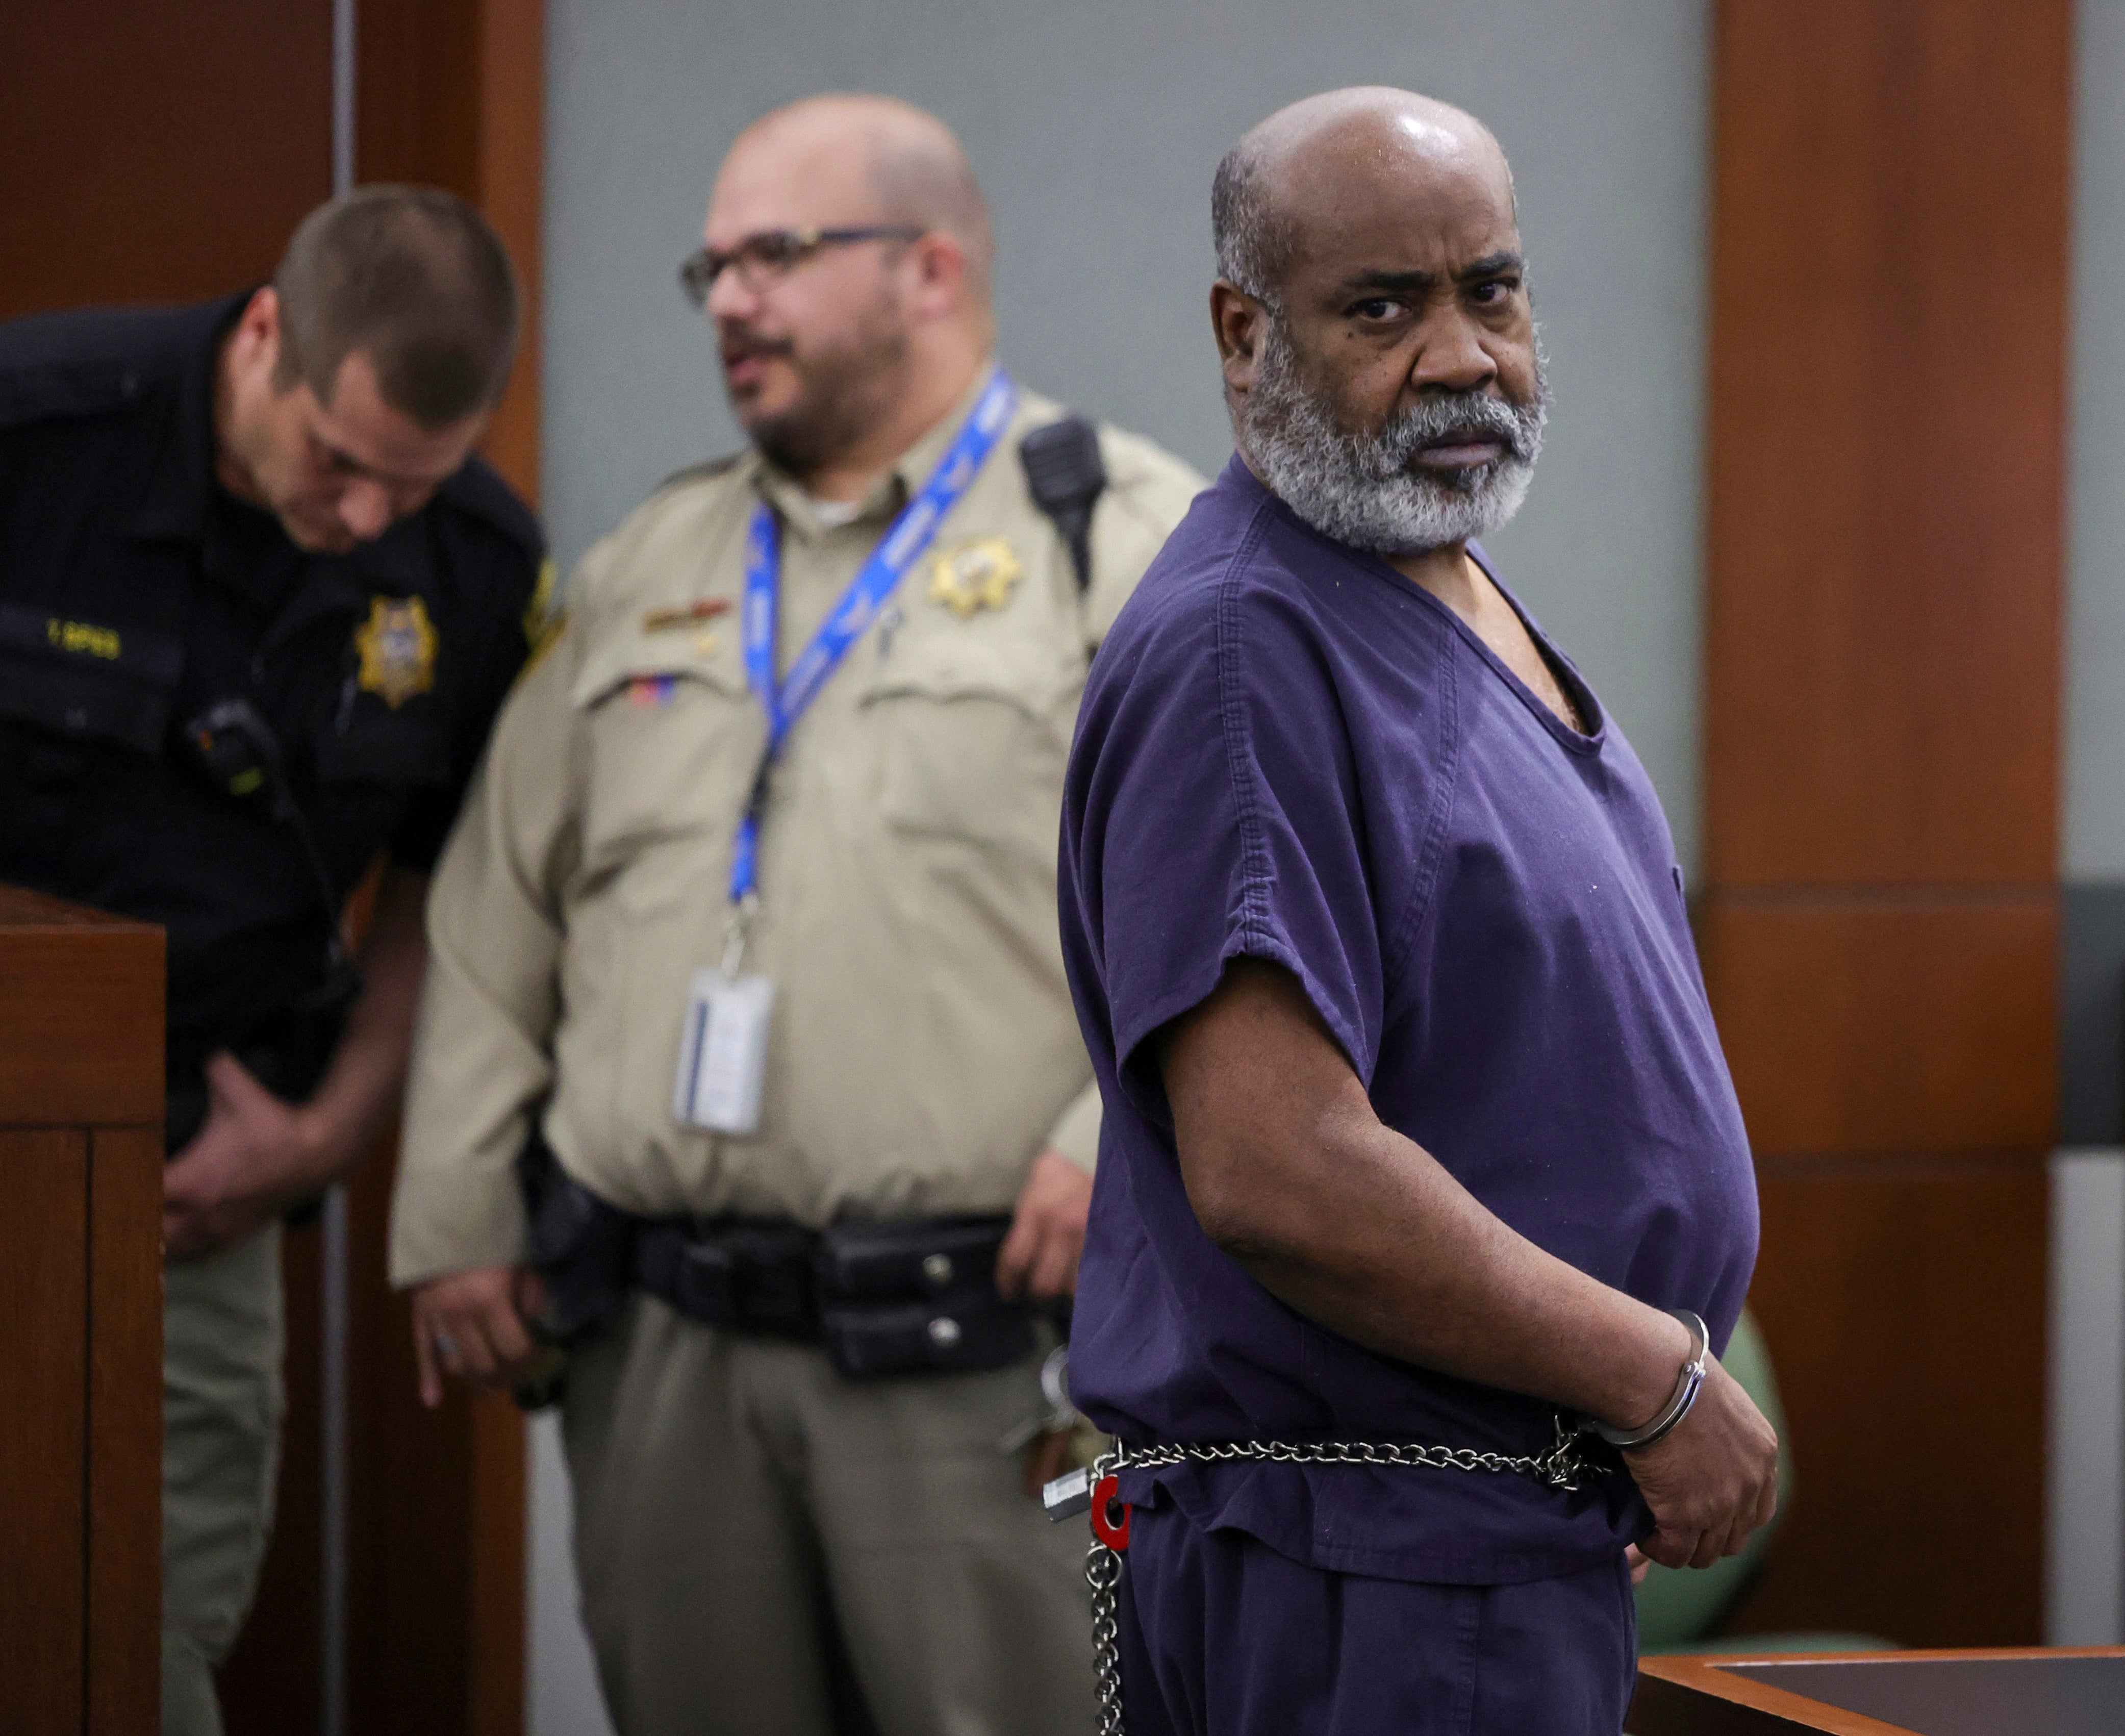 Duane Keith Davis appears for his arraignment at the Regional Justice Center in Las Vegas.